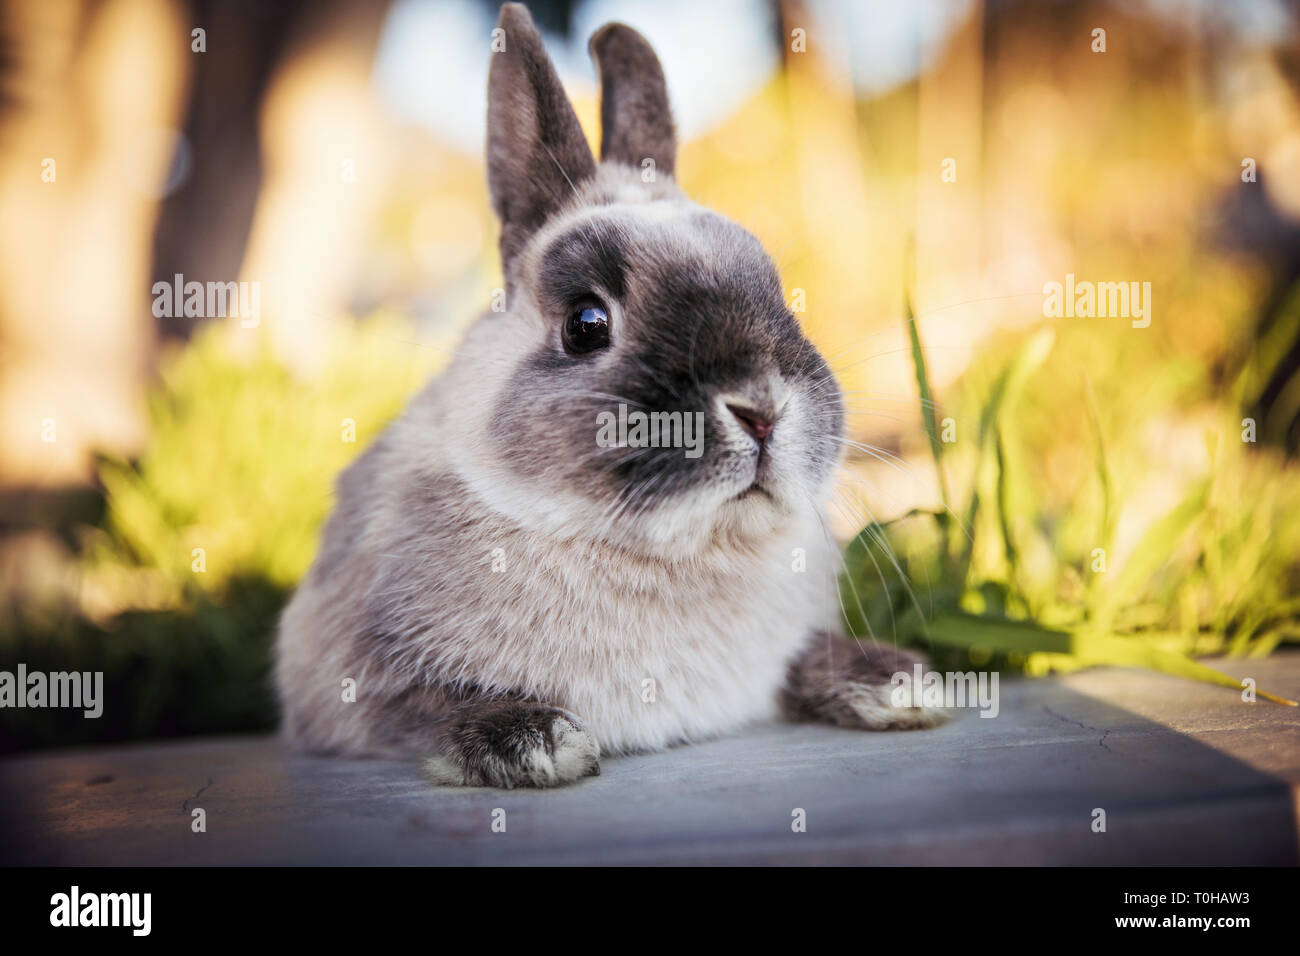 A close-up portrait of a dwarf bunny resting his paws on a wall and looking toward camera. Stock Photo